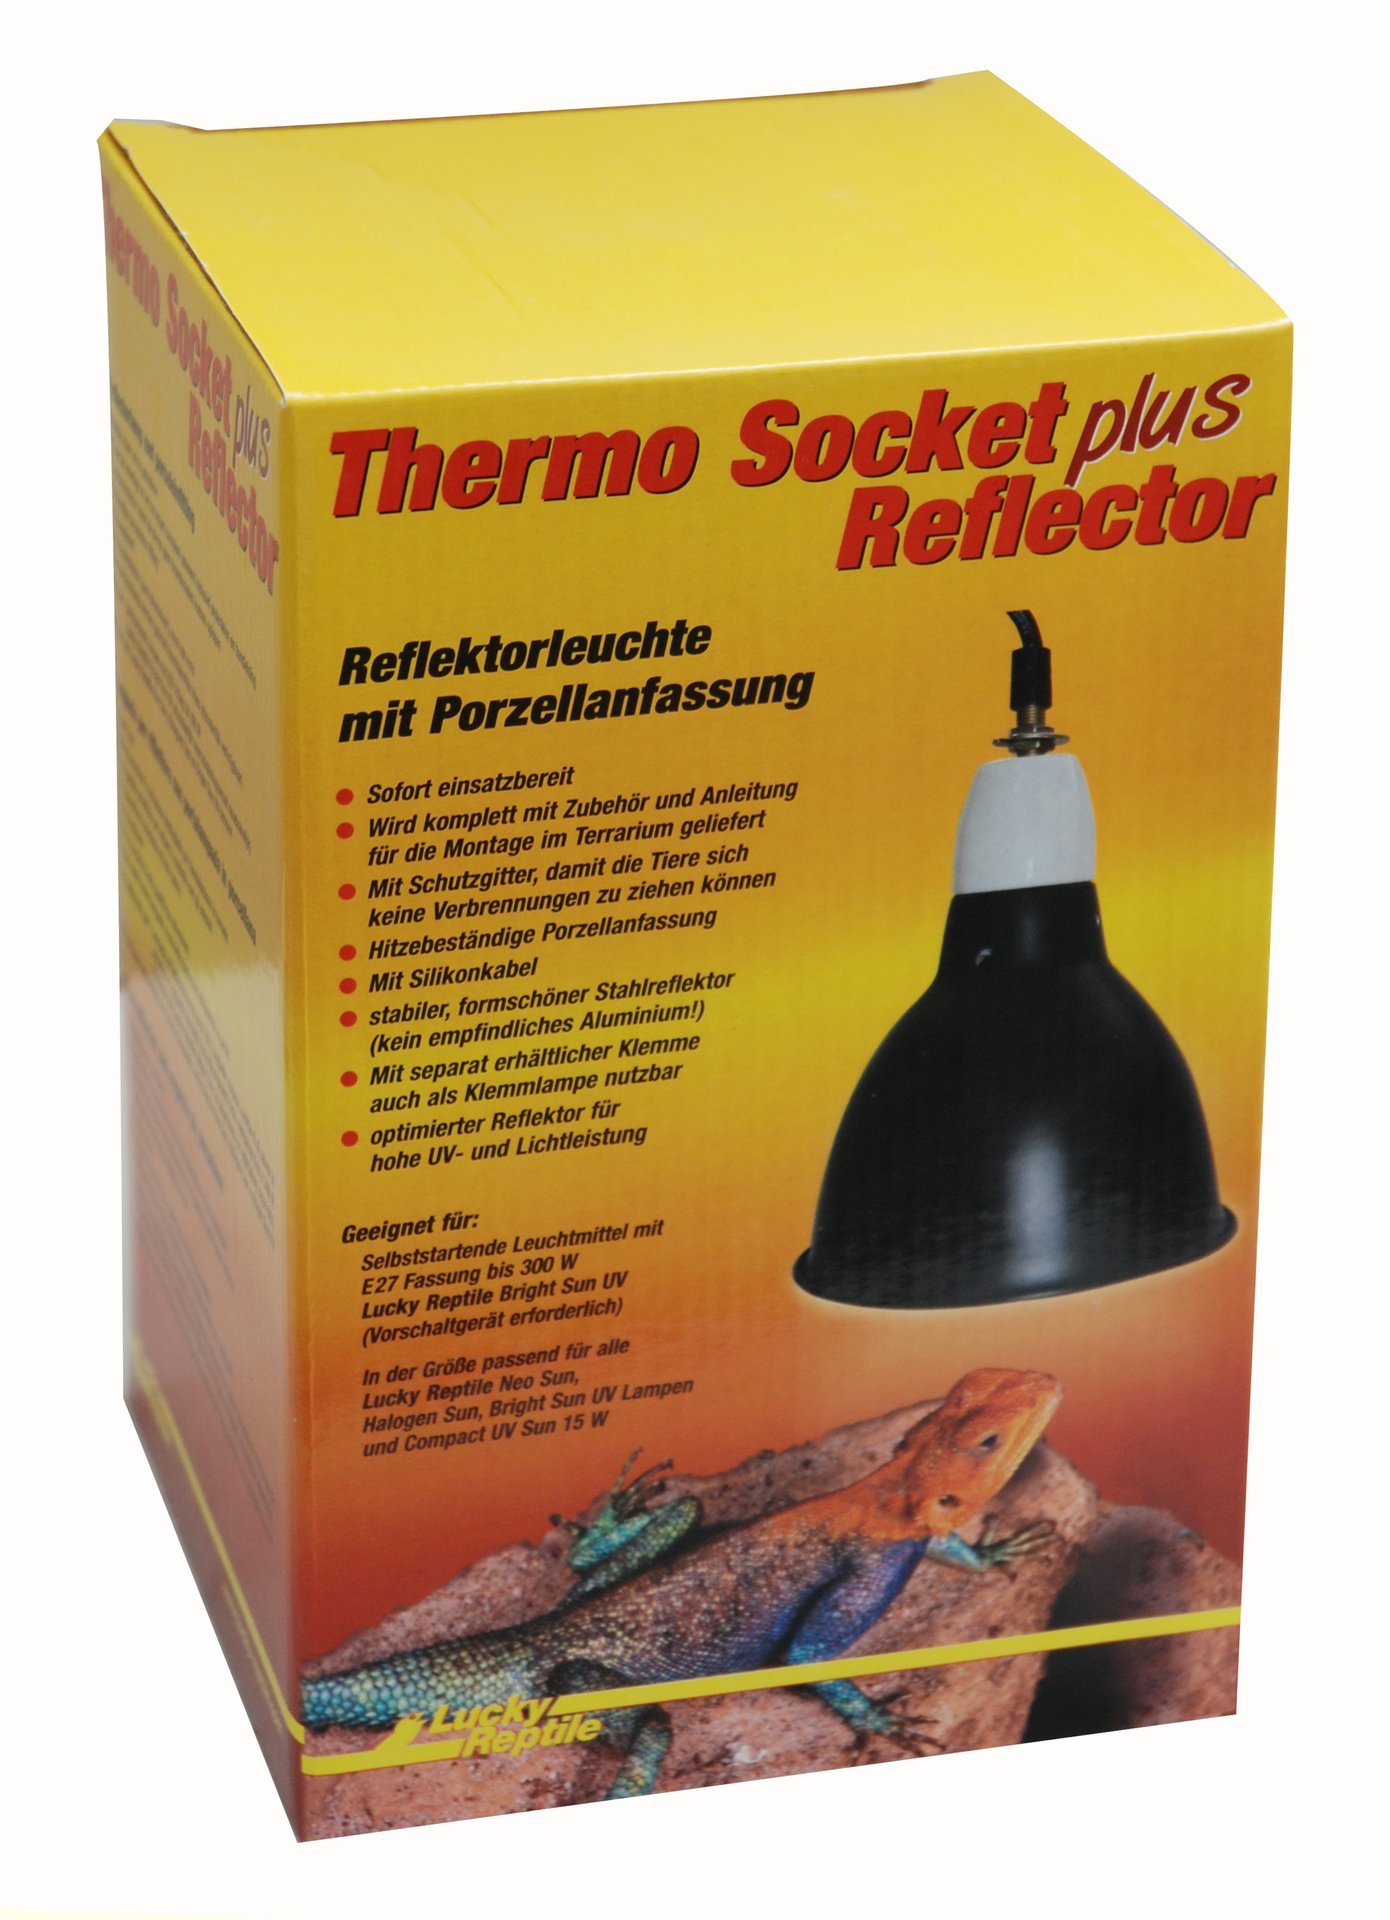 Peter Hoch Thermo Socket mit Reflector